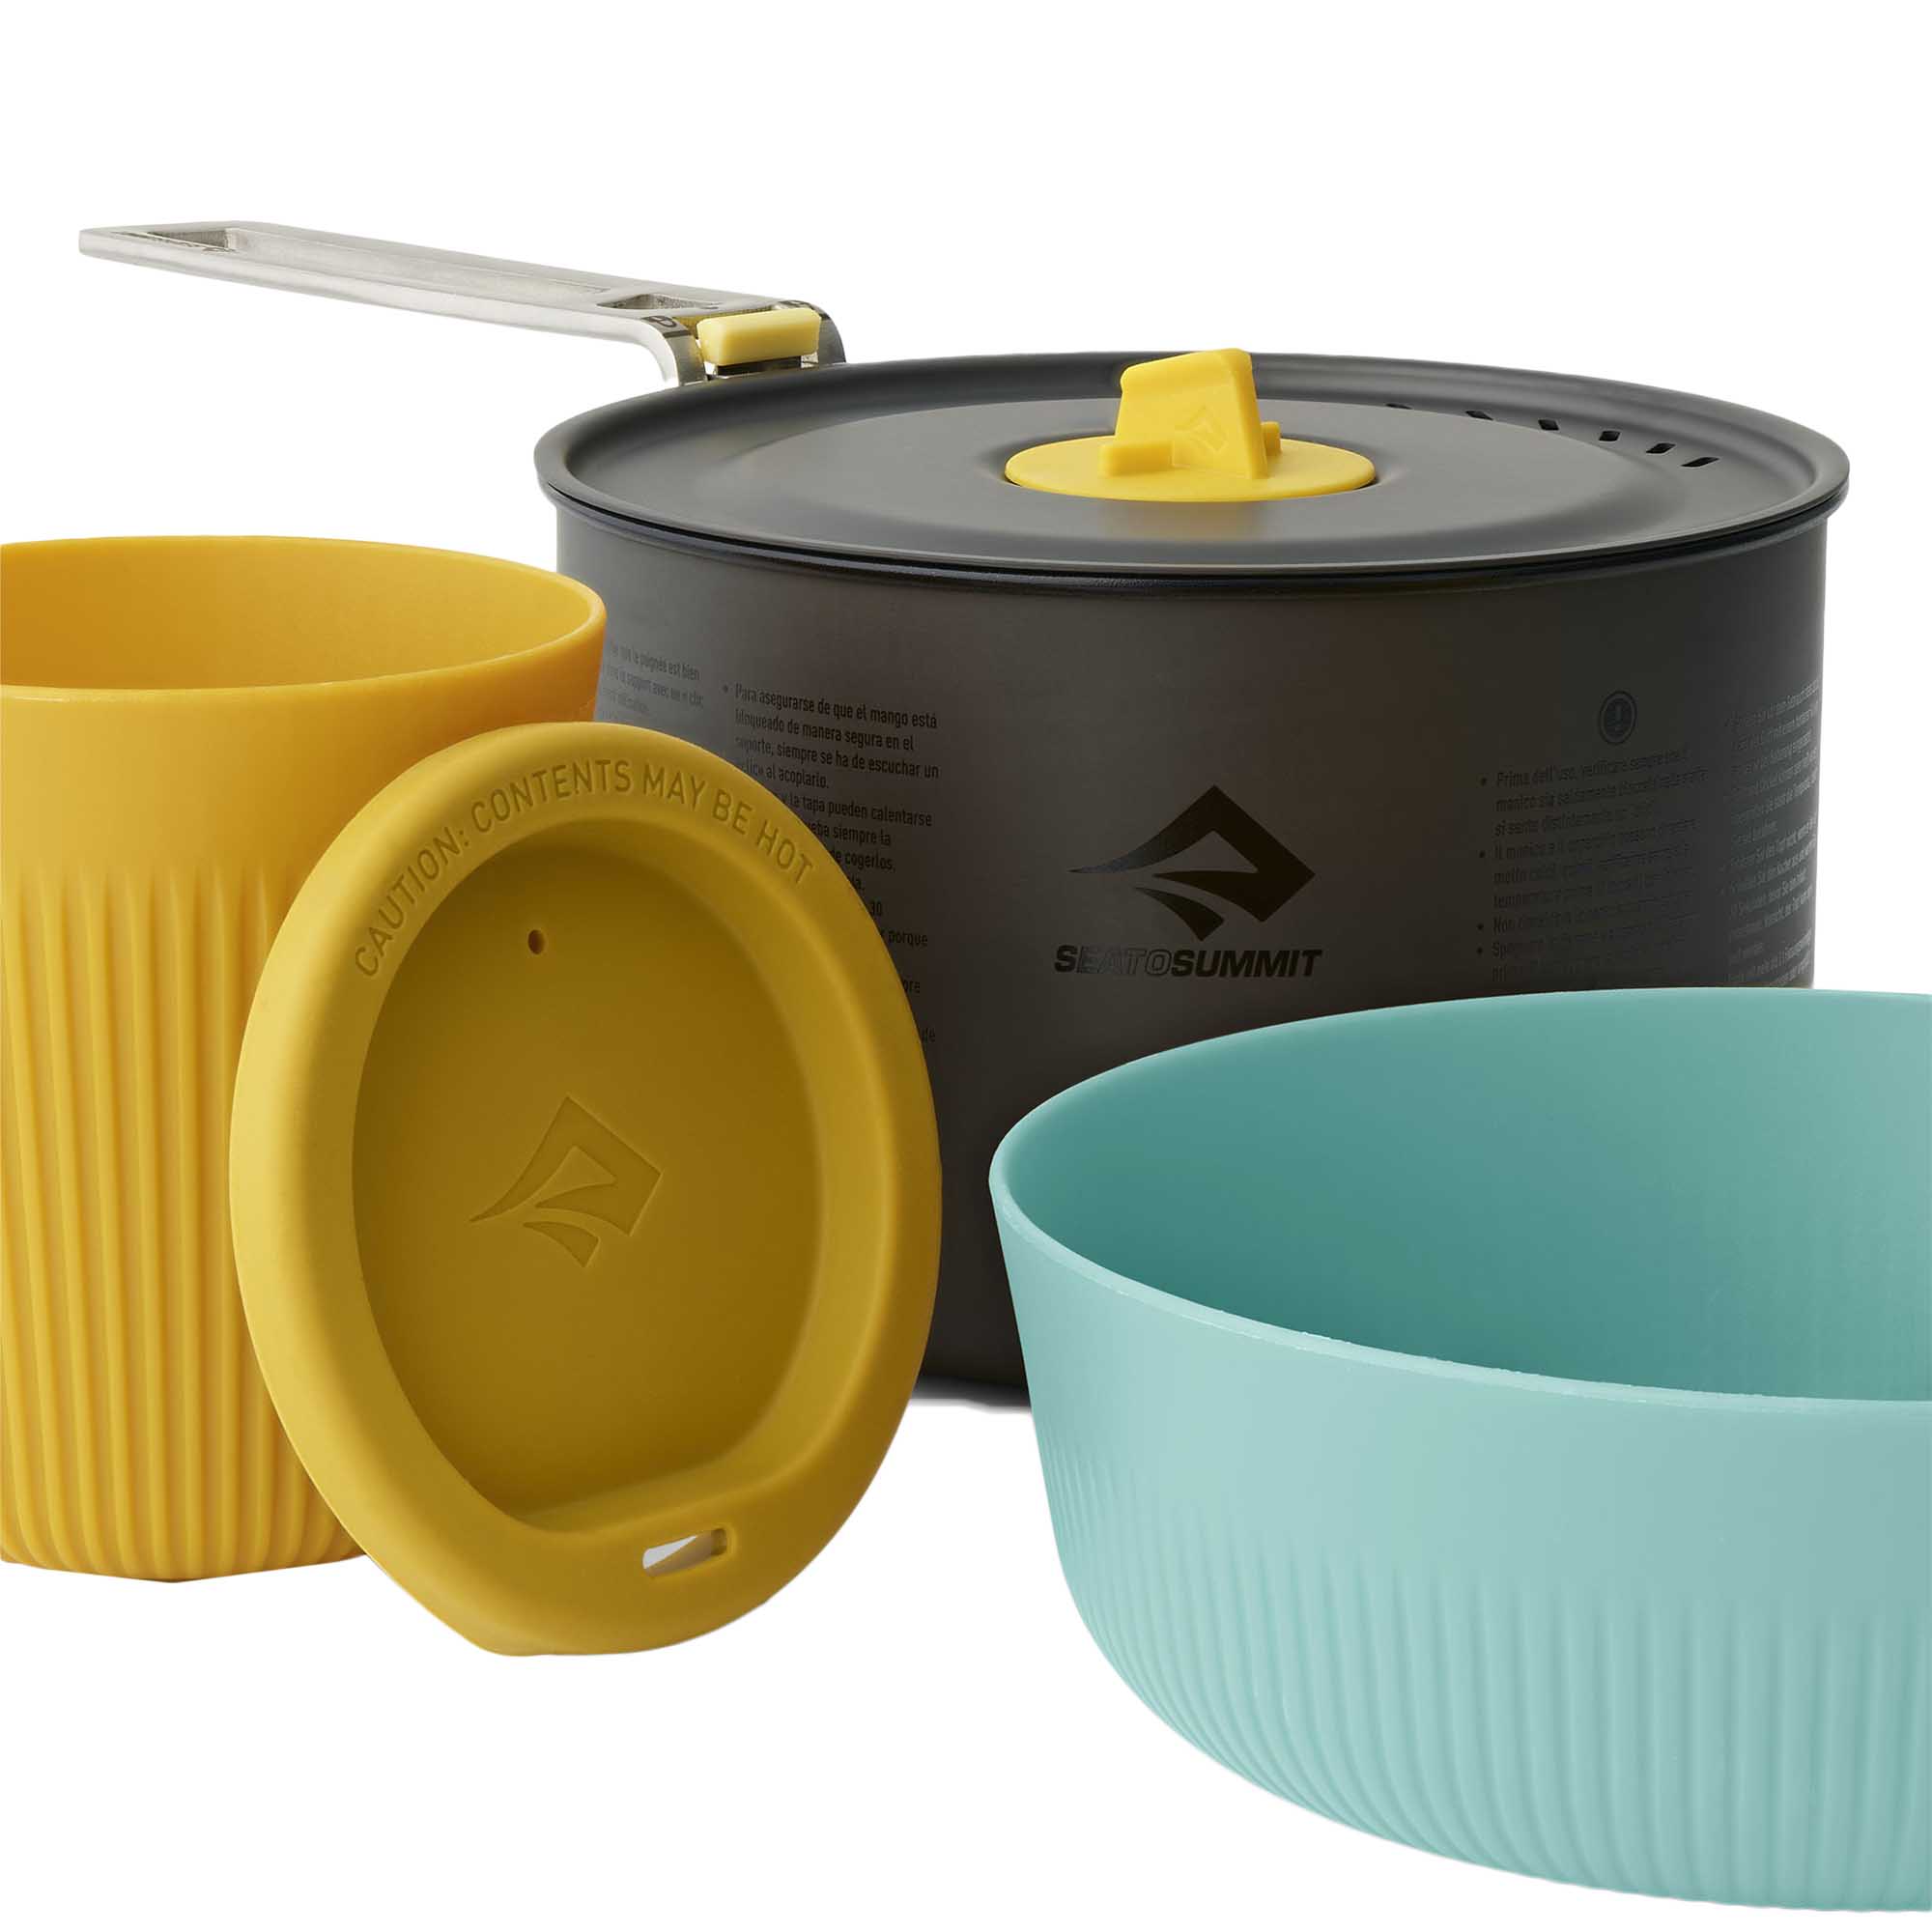 Sea to Summit Frontier 3pc Ultralight One Pot Cook Set